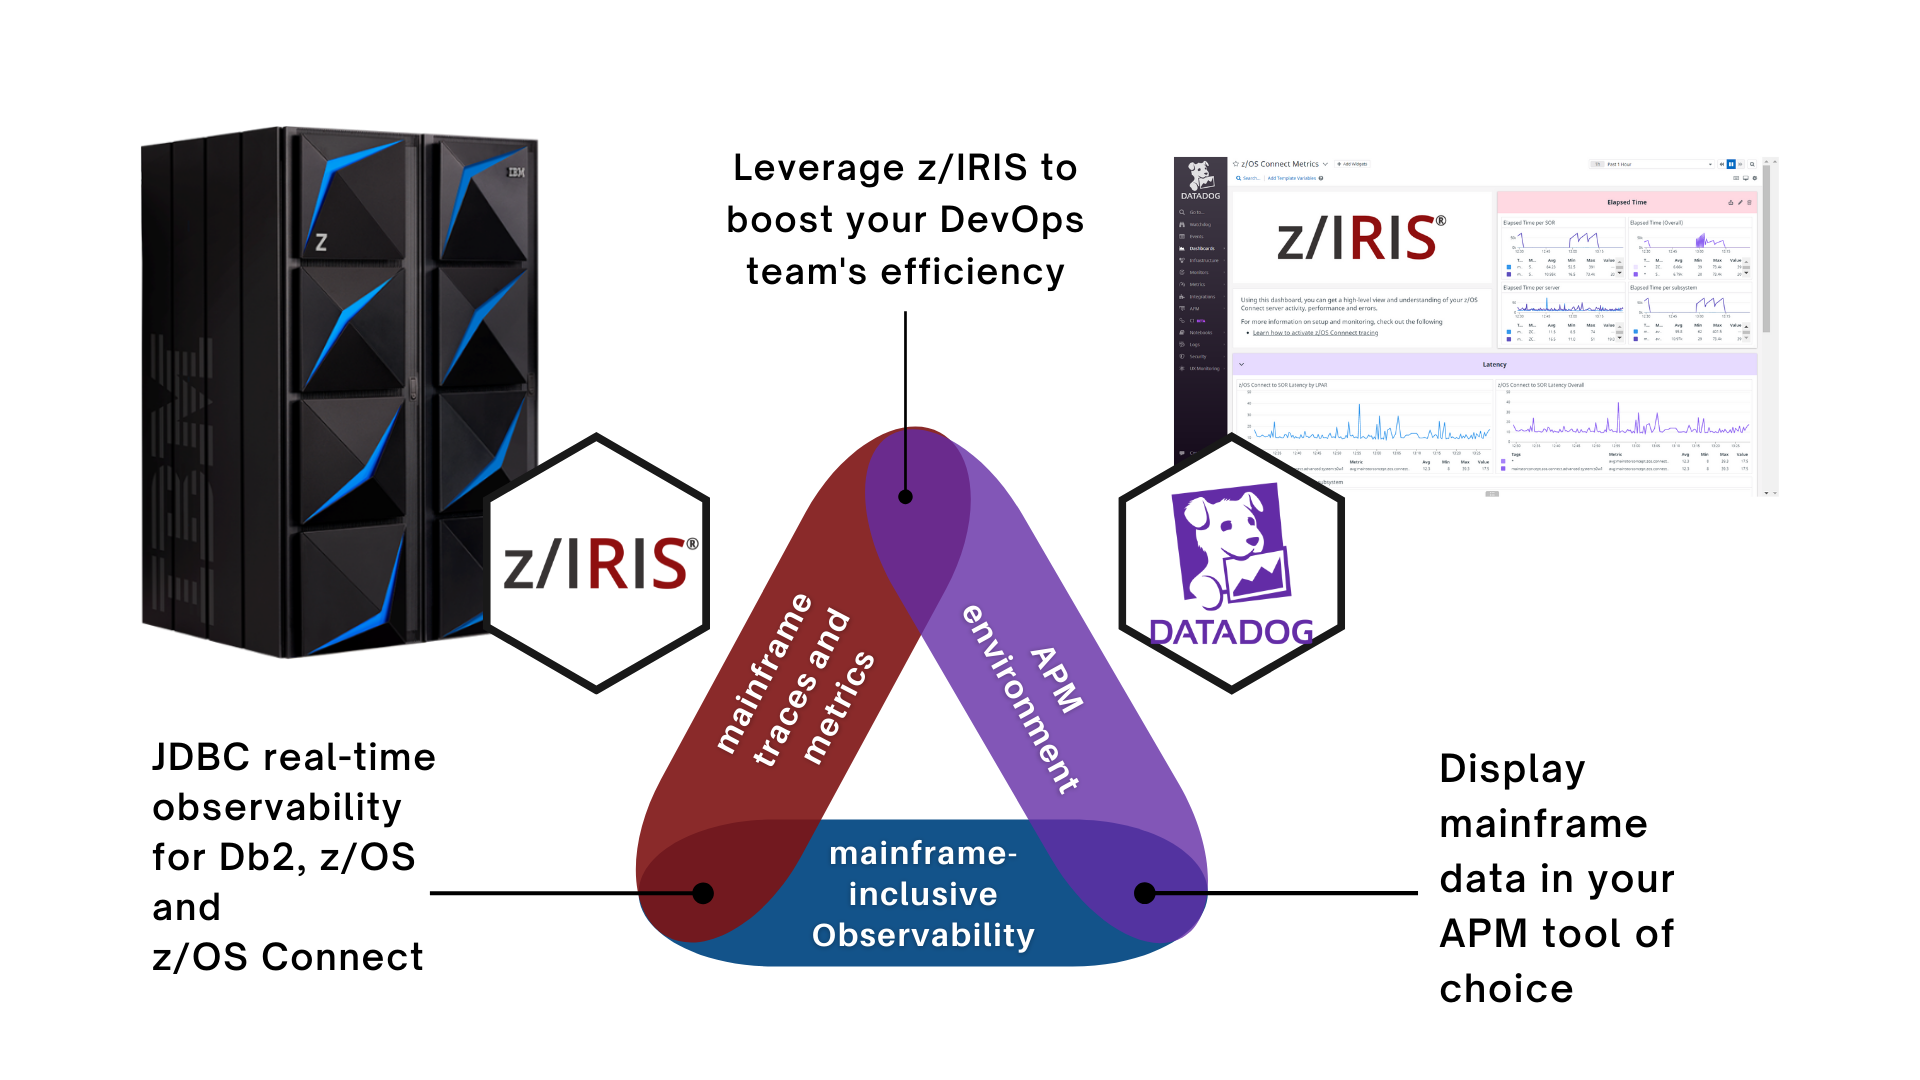 Use mainframe-inclusive observability to boost your DevOps teams efficiency in Datadog